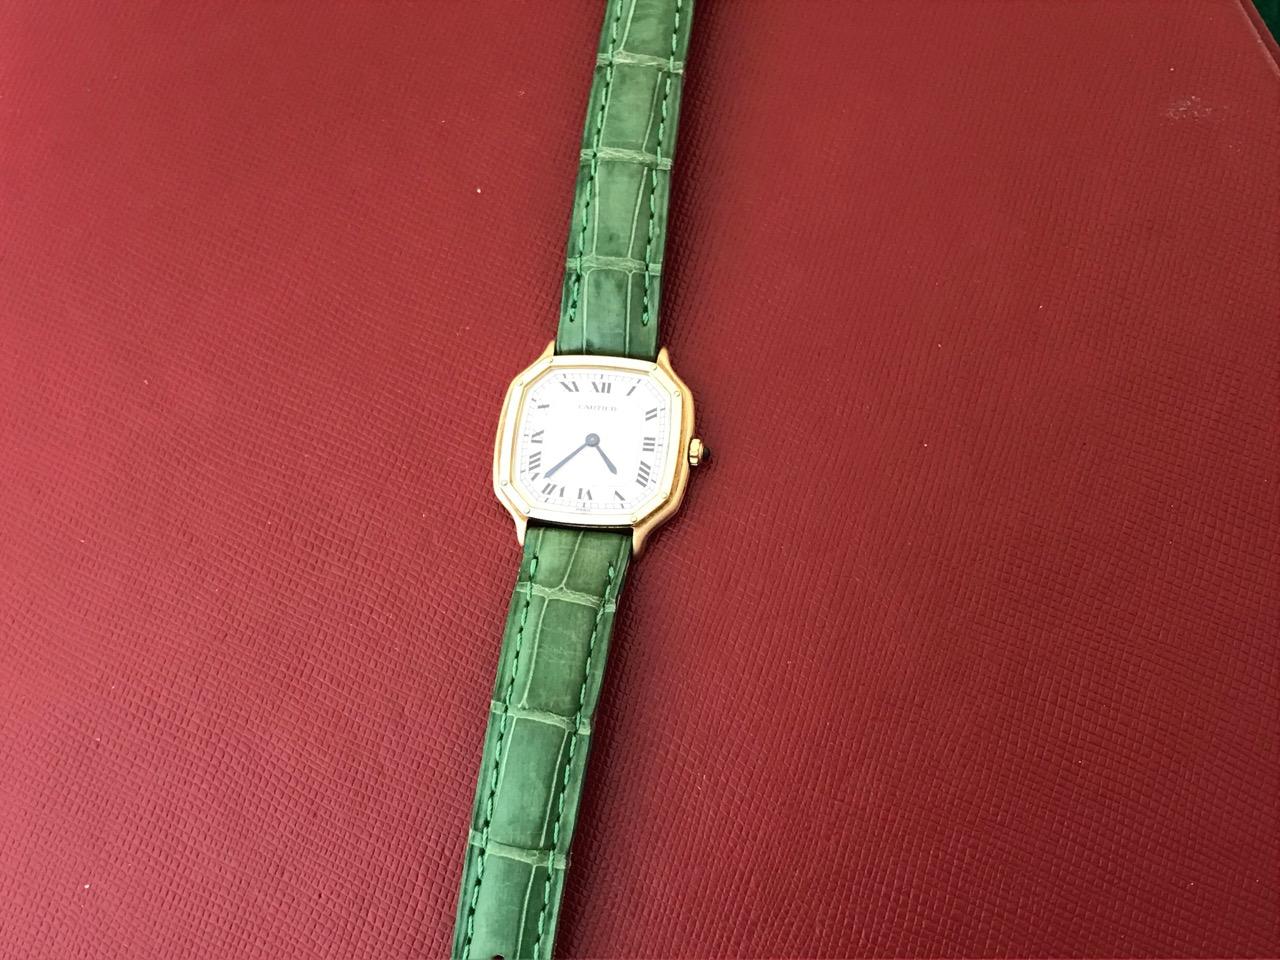 Cartier Pre Owned Ladies Manual Winding wrist watch. White Dial with black Roman numerals. 18k Yellow Gold octagonal style case with Blue Sapphire cabachon setting crown (25x28mm). Dark green strap with 18k Yellow Gold Cartier buckle. Inventory